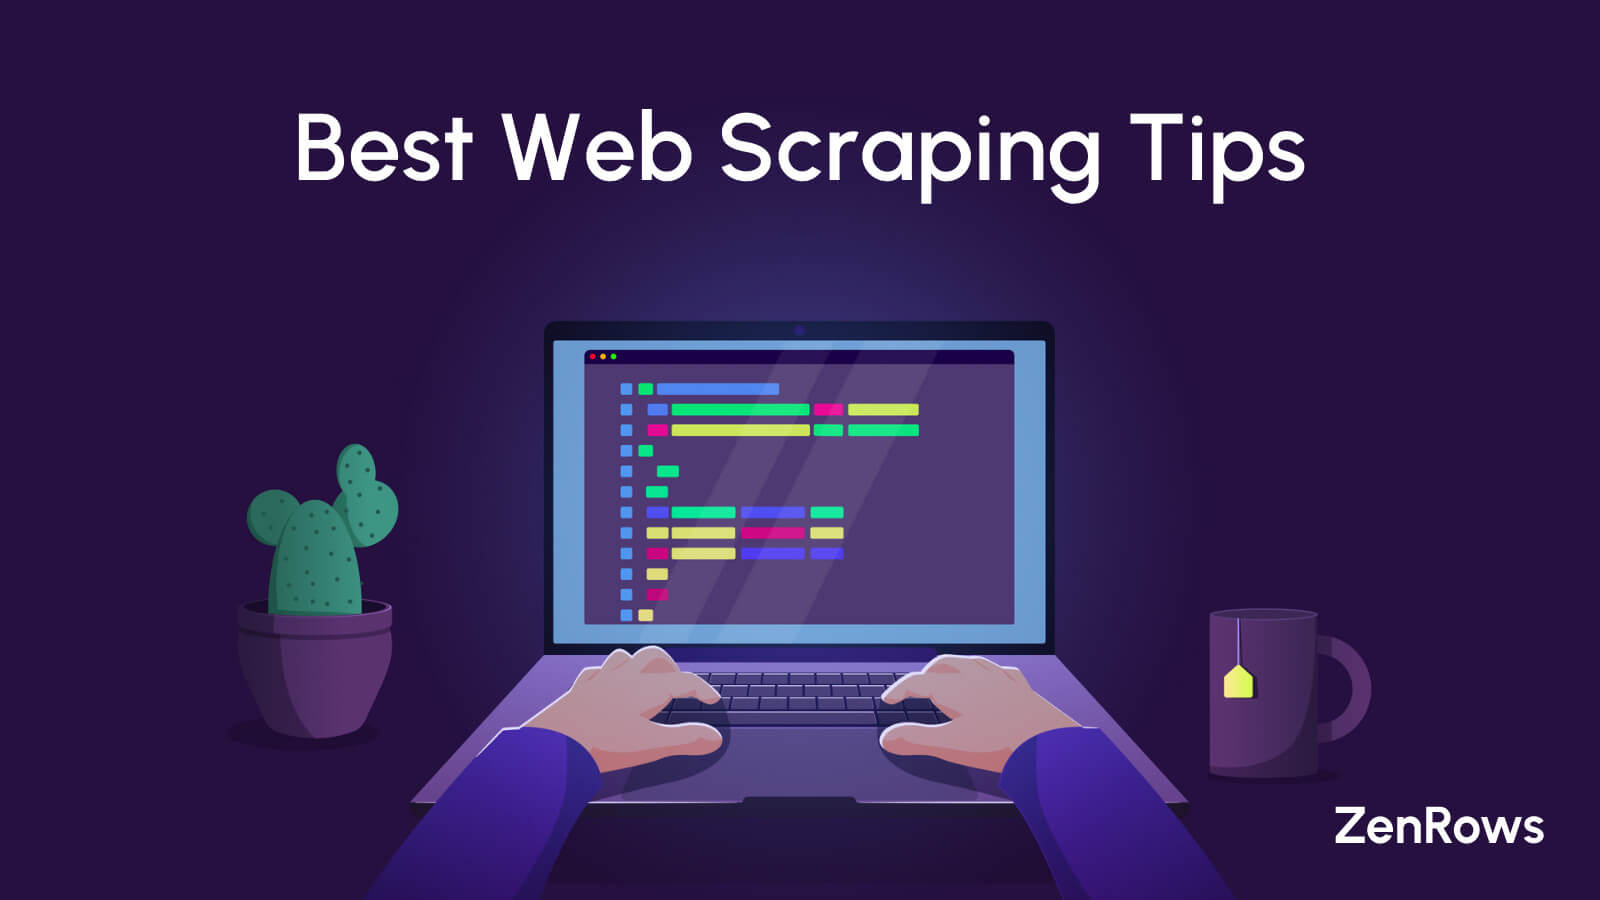 7 Best Web Scraping Tips to Get Data Like a Pro